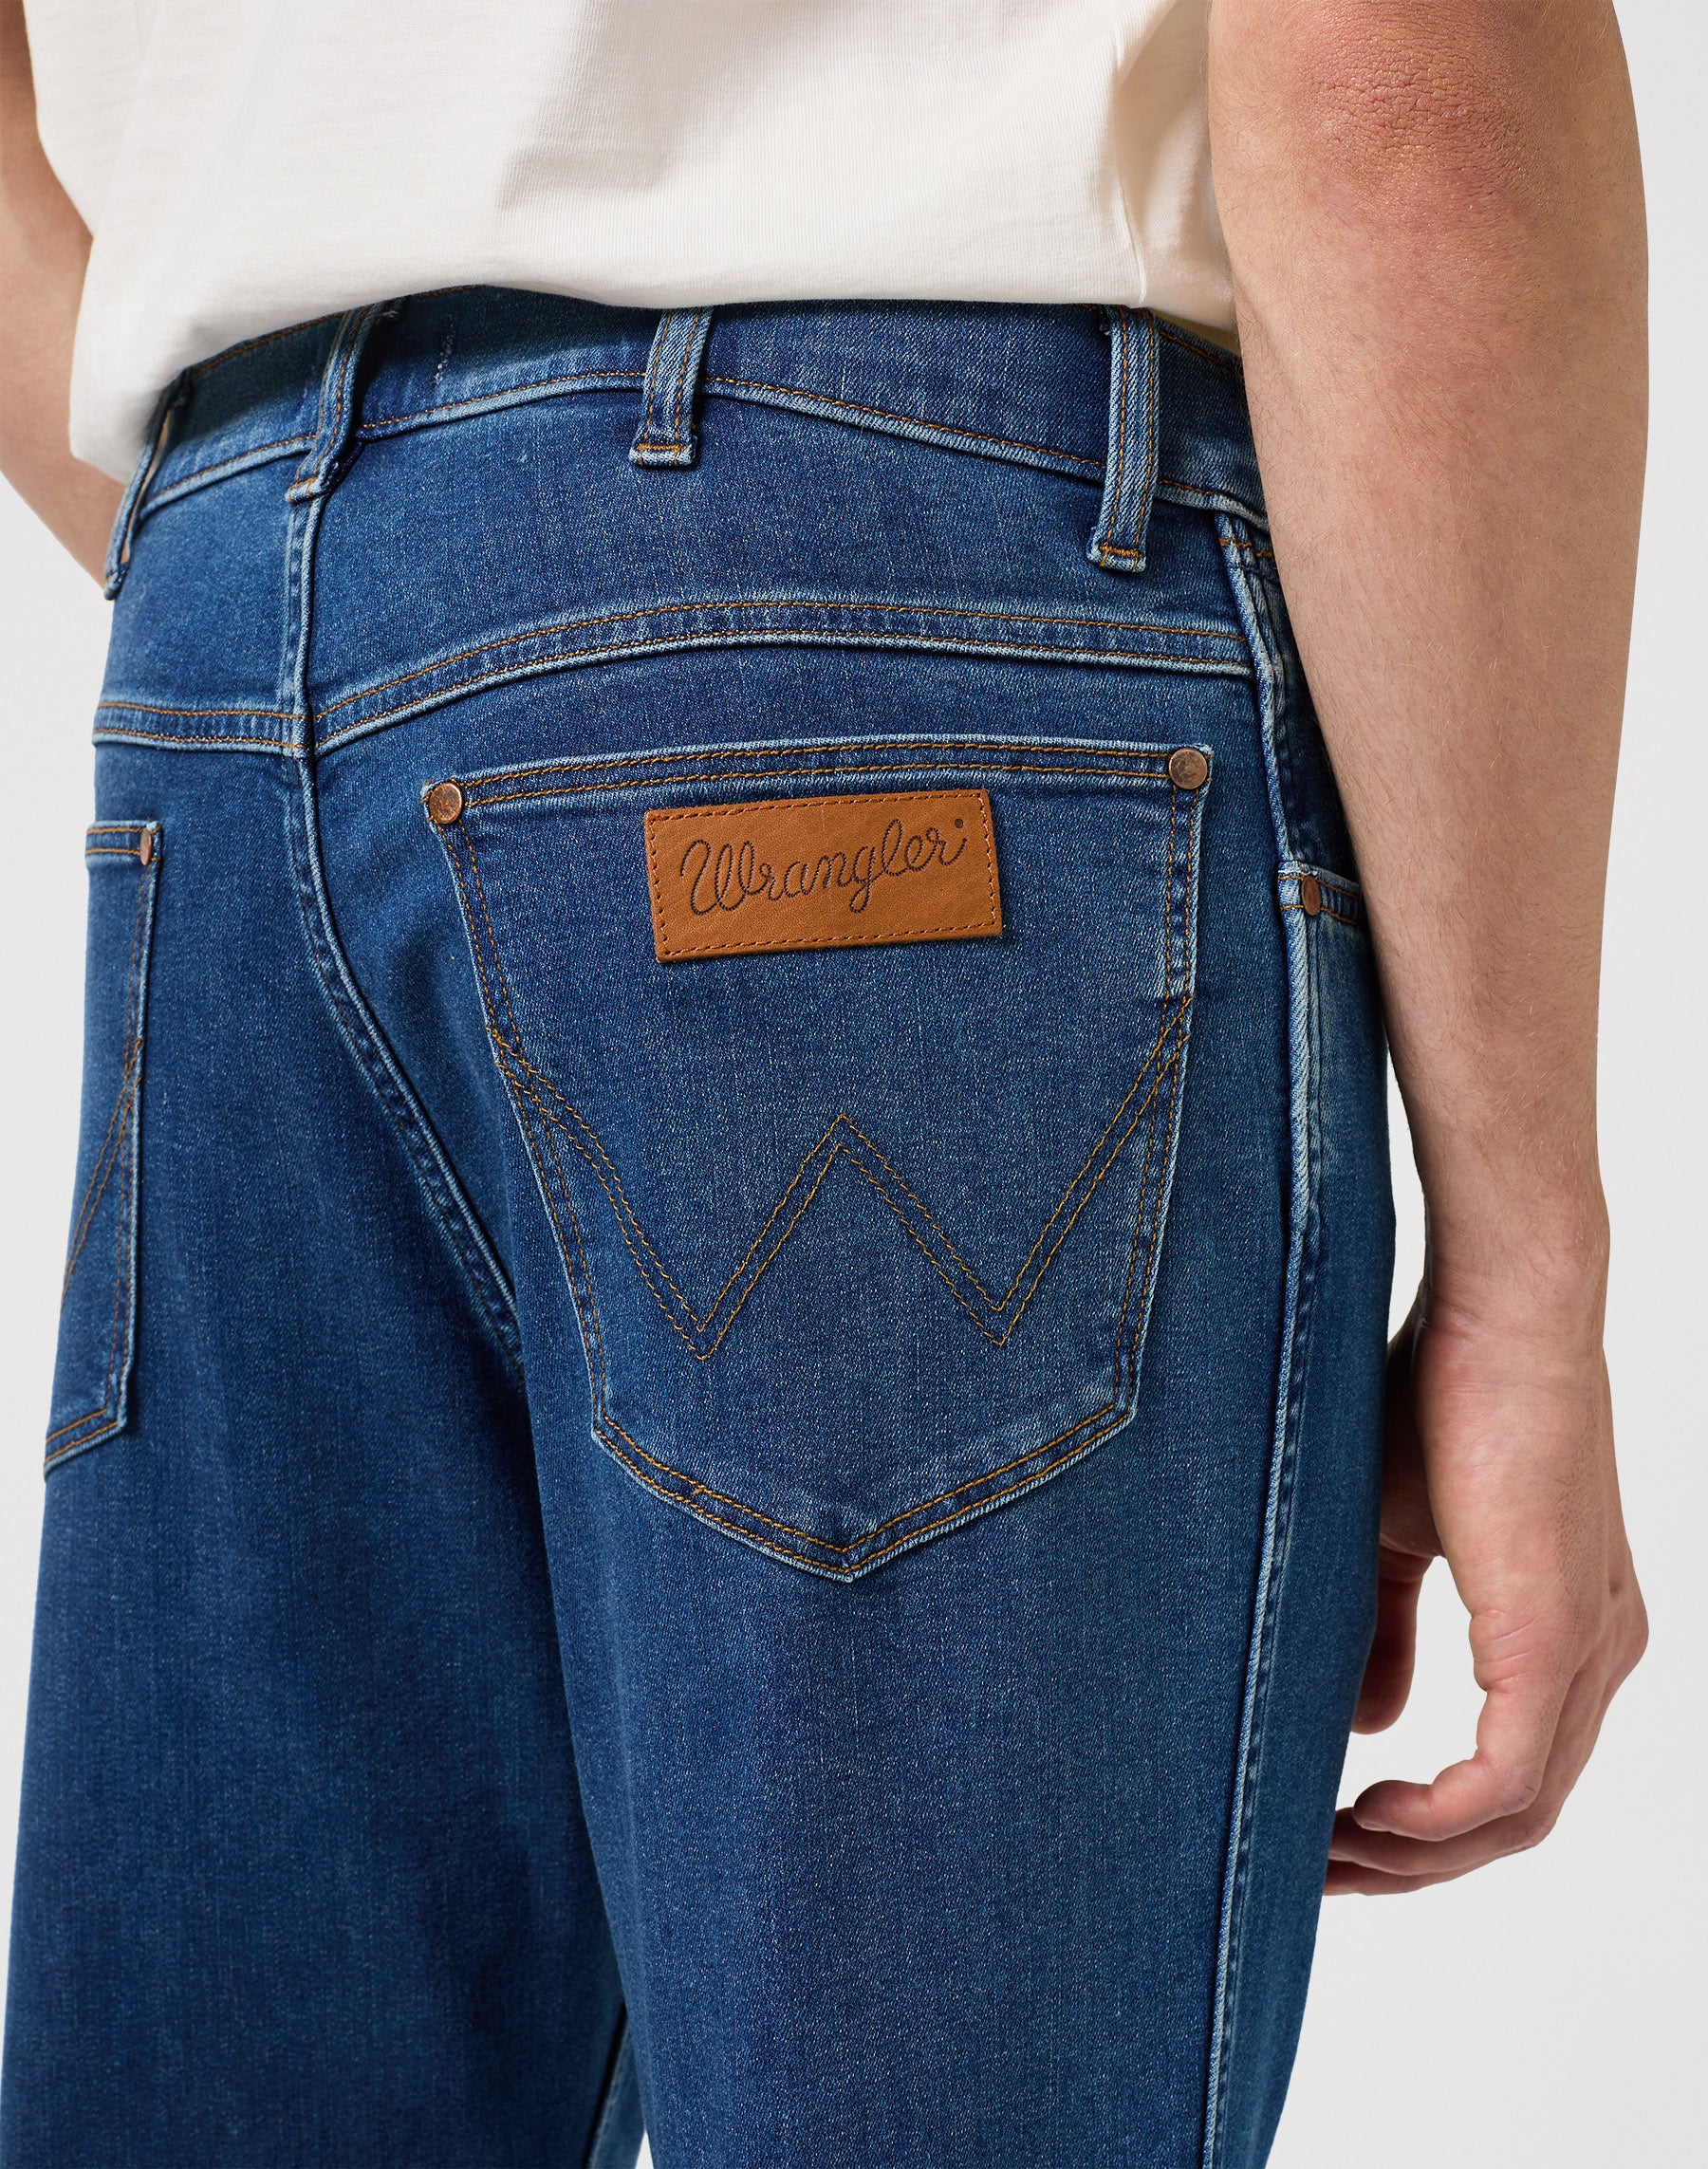 River in Coldwater Jeans Wrangler   